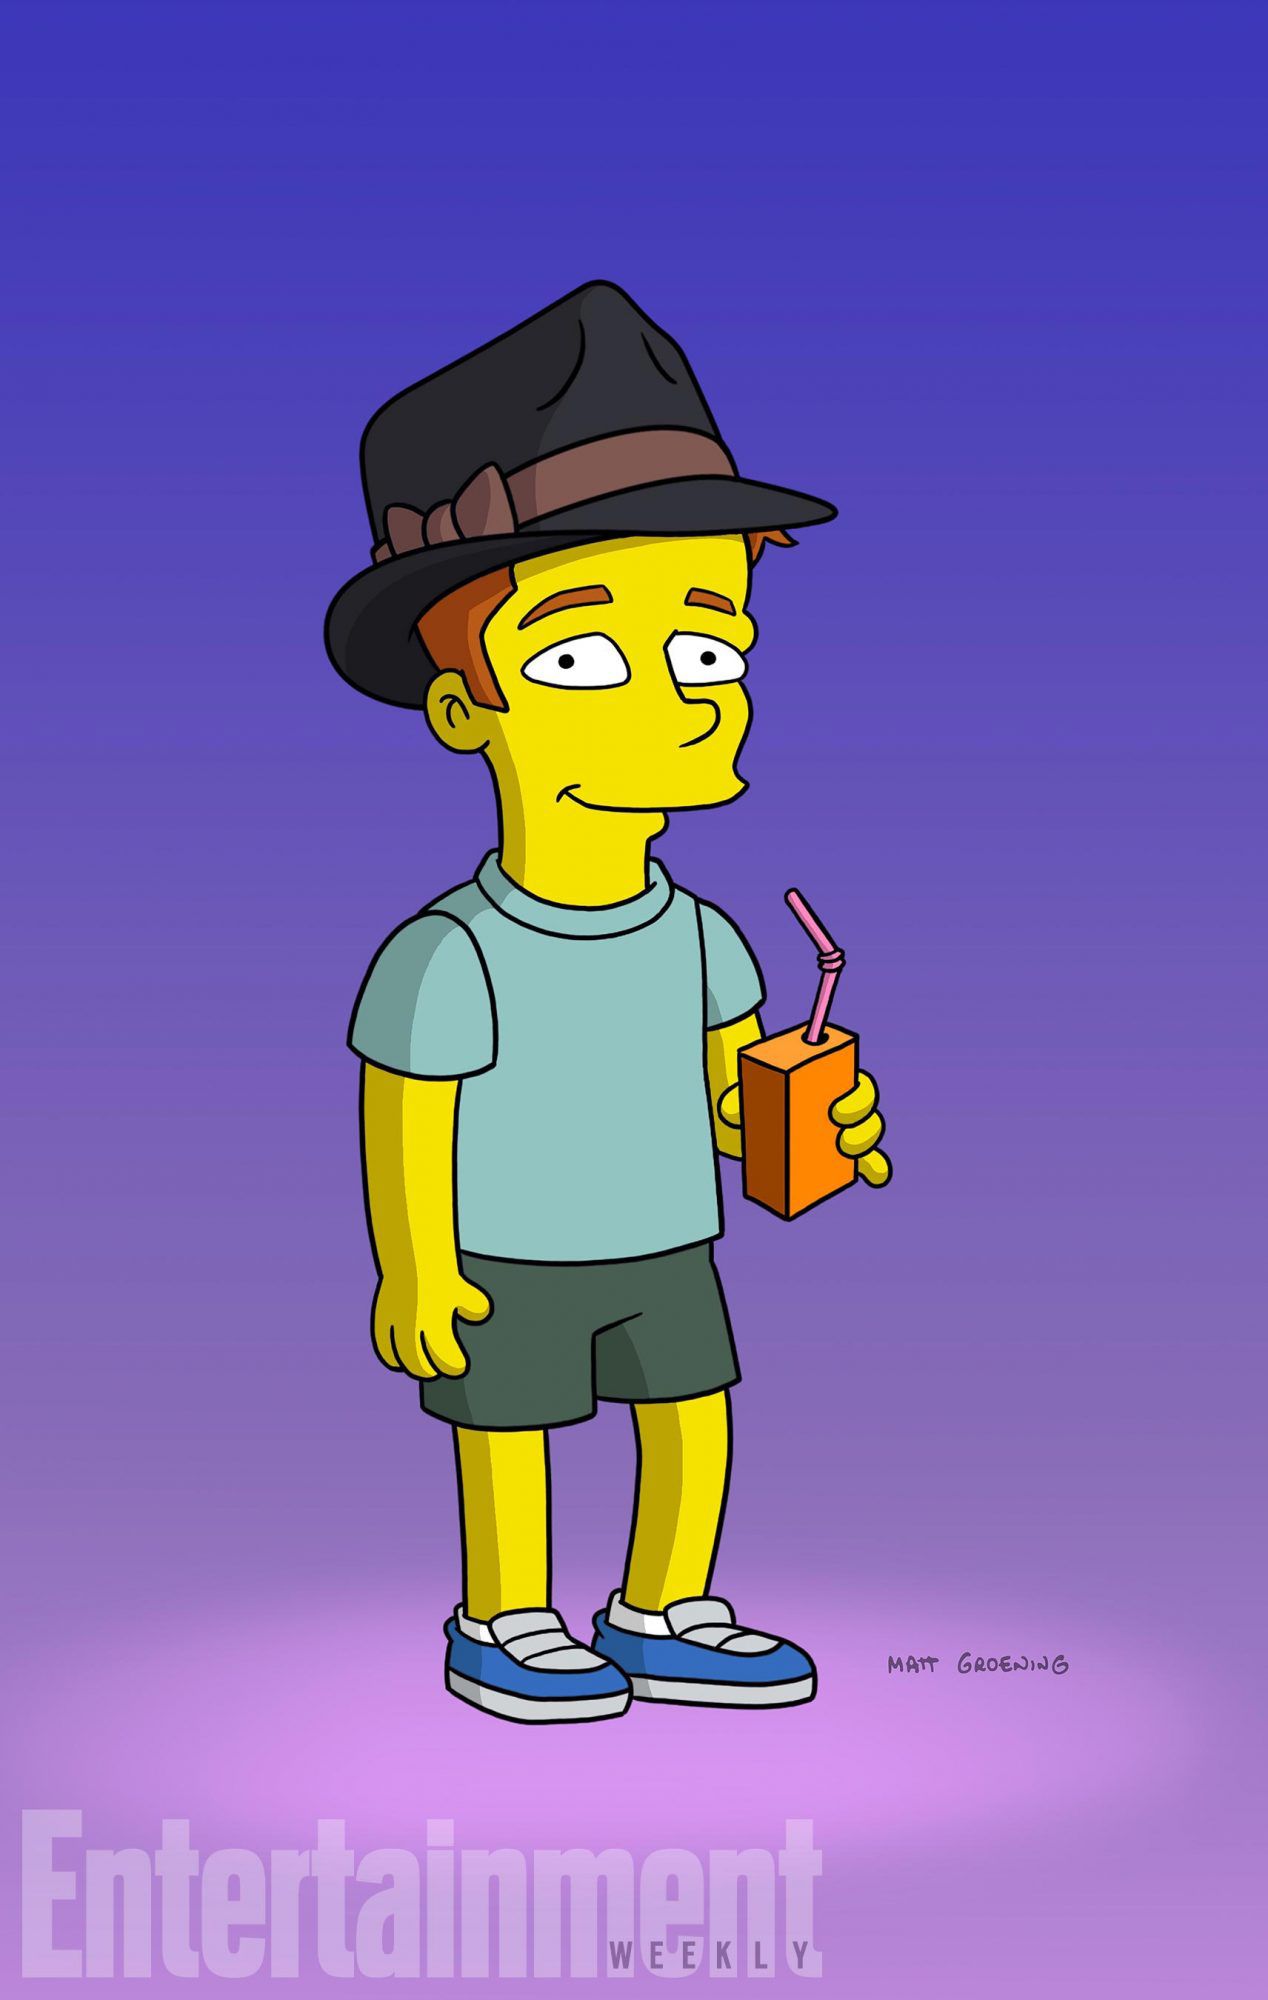 Ed Sheeran: First look at singer on The Simpsons 